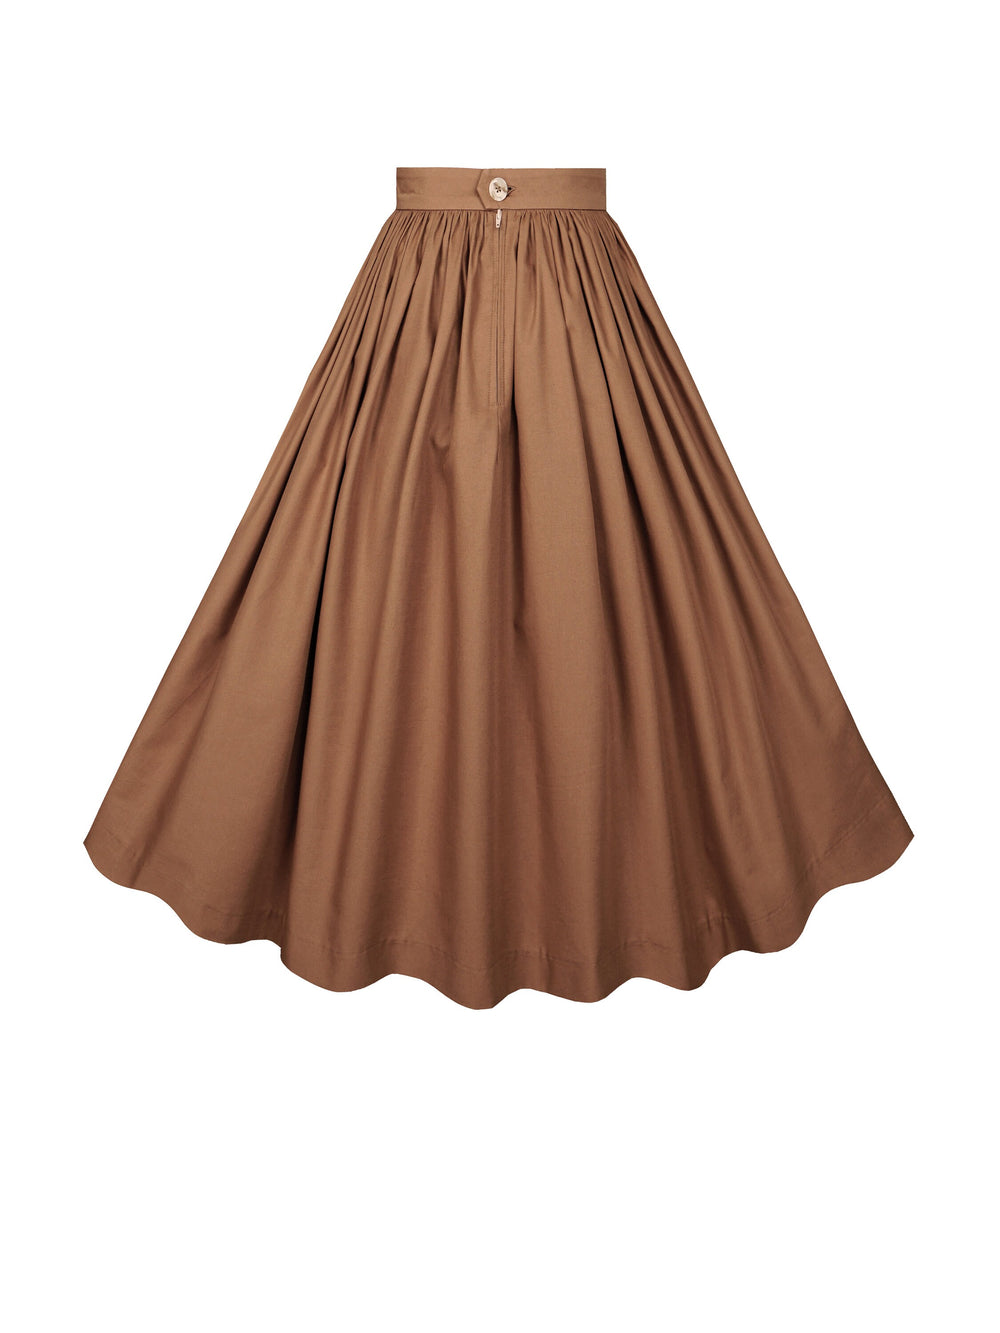 MTO - Lola Skirt in in Chocolate Brown Cotton